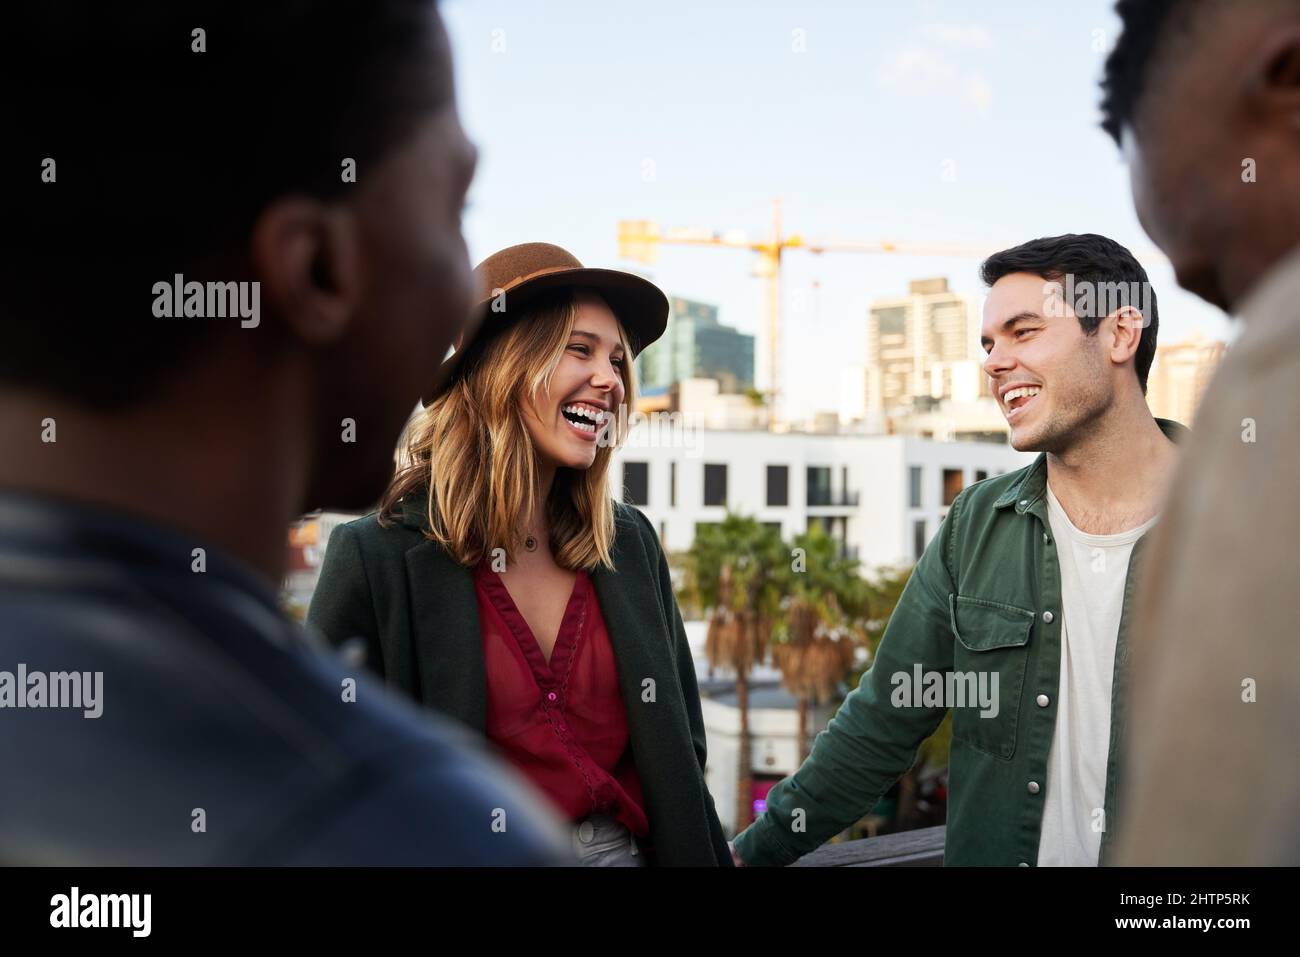 Caucasian female laughing with group of multi-cultural friends socializing on a rooftop terrace at dusk. Stock Photo